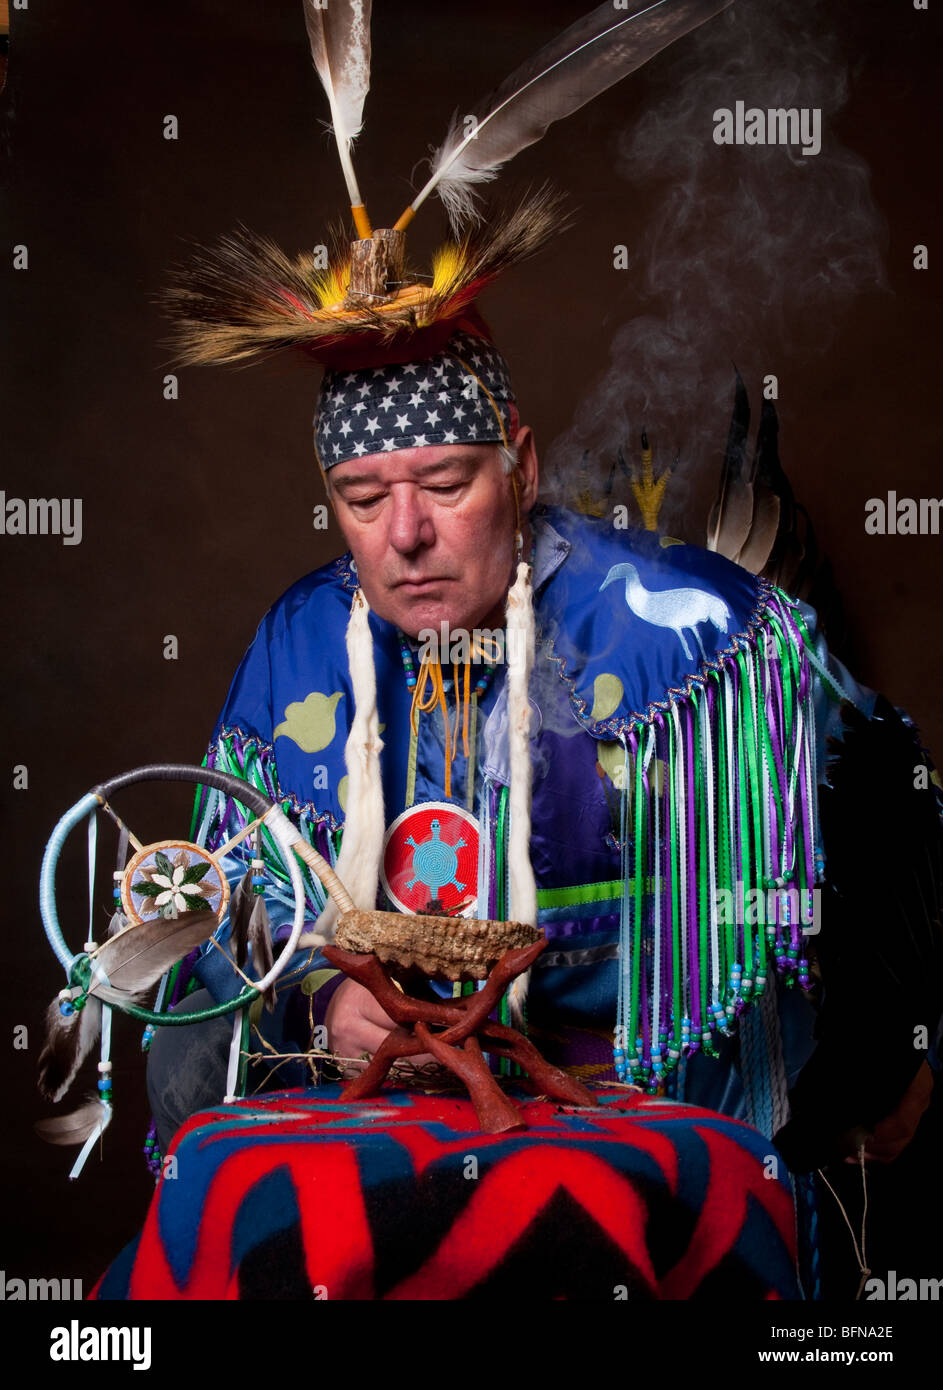 Native American Indian male in full regalia leaning over burning sage bowl with dream catcher in hand on brown background Stock Photo